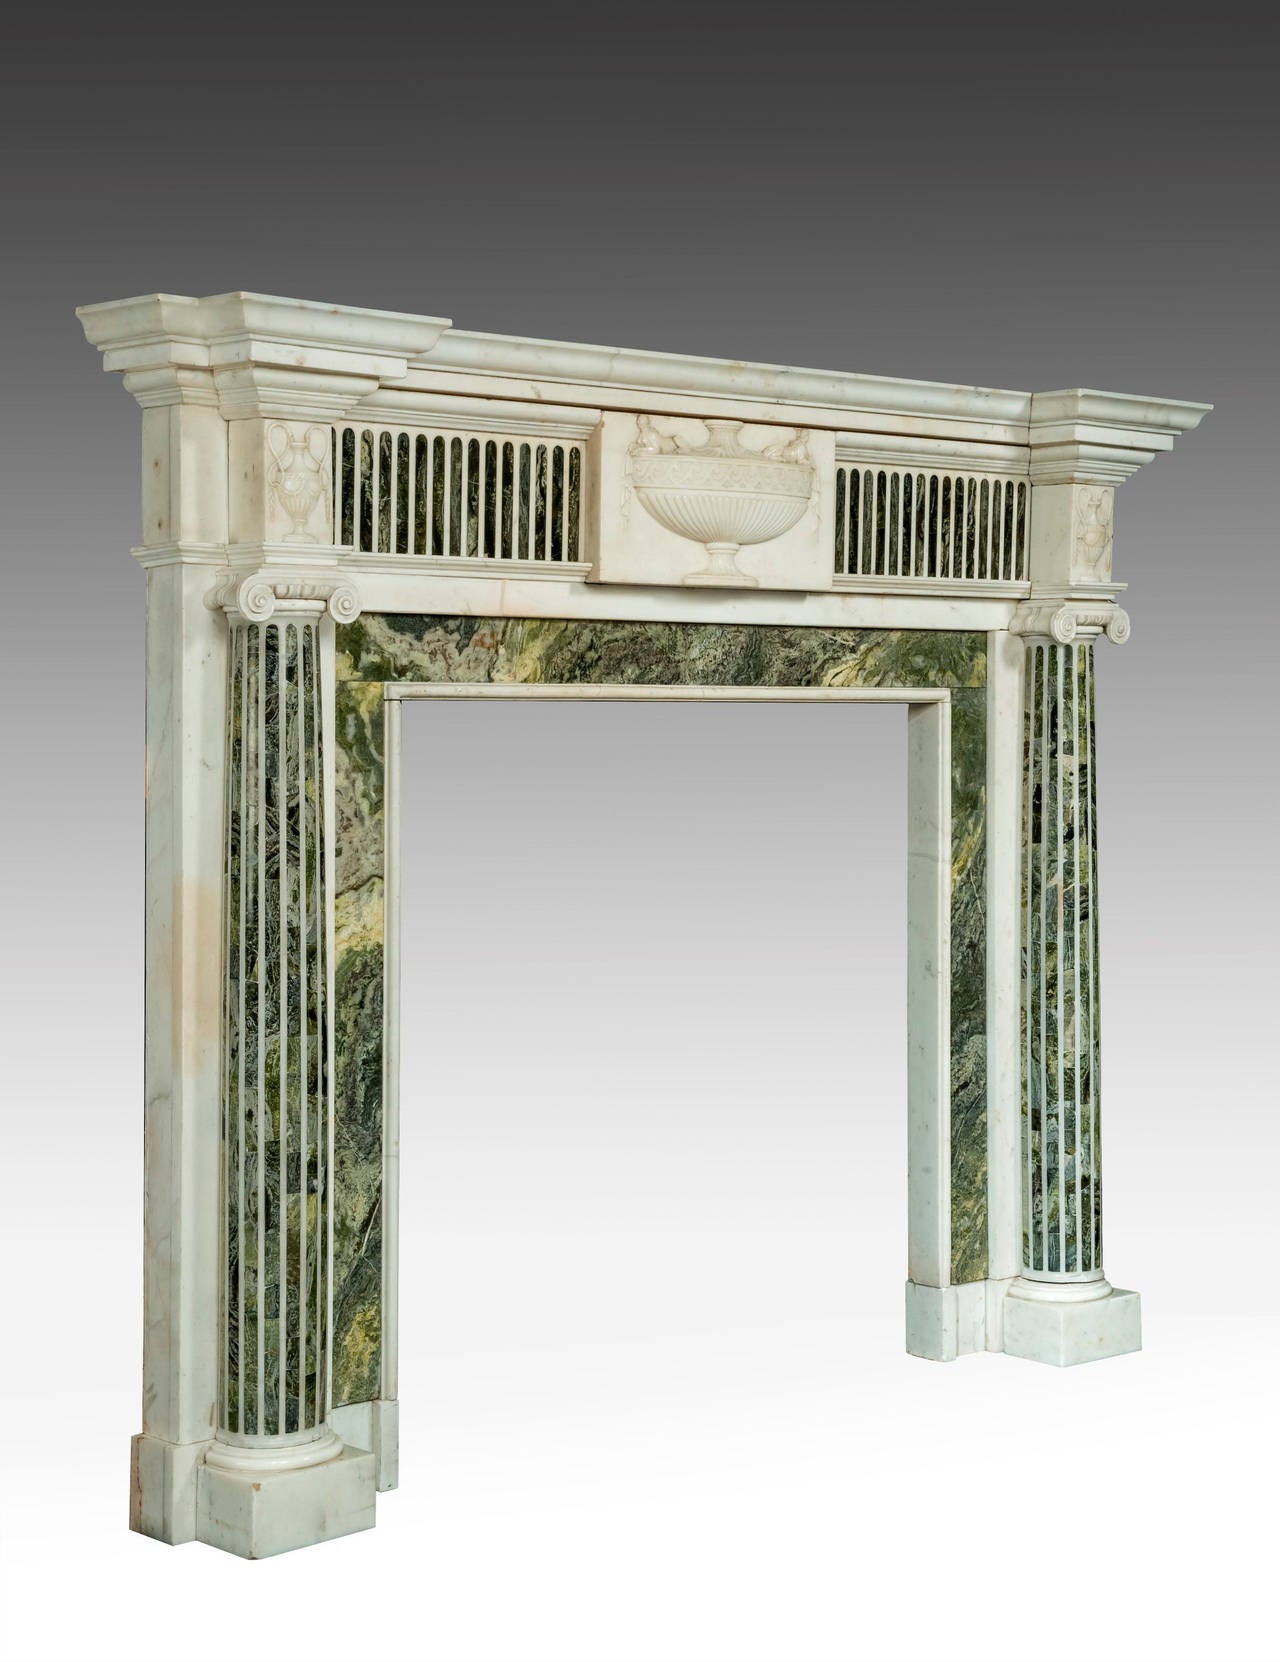 An important early 19th century marble fireplace. The jambs with elaborately inlaid pillars of contrasting marble. The tablet of good form, with drapes emanating from a cerated top. The top of the up rights with neoclassic urns and with floating